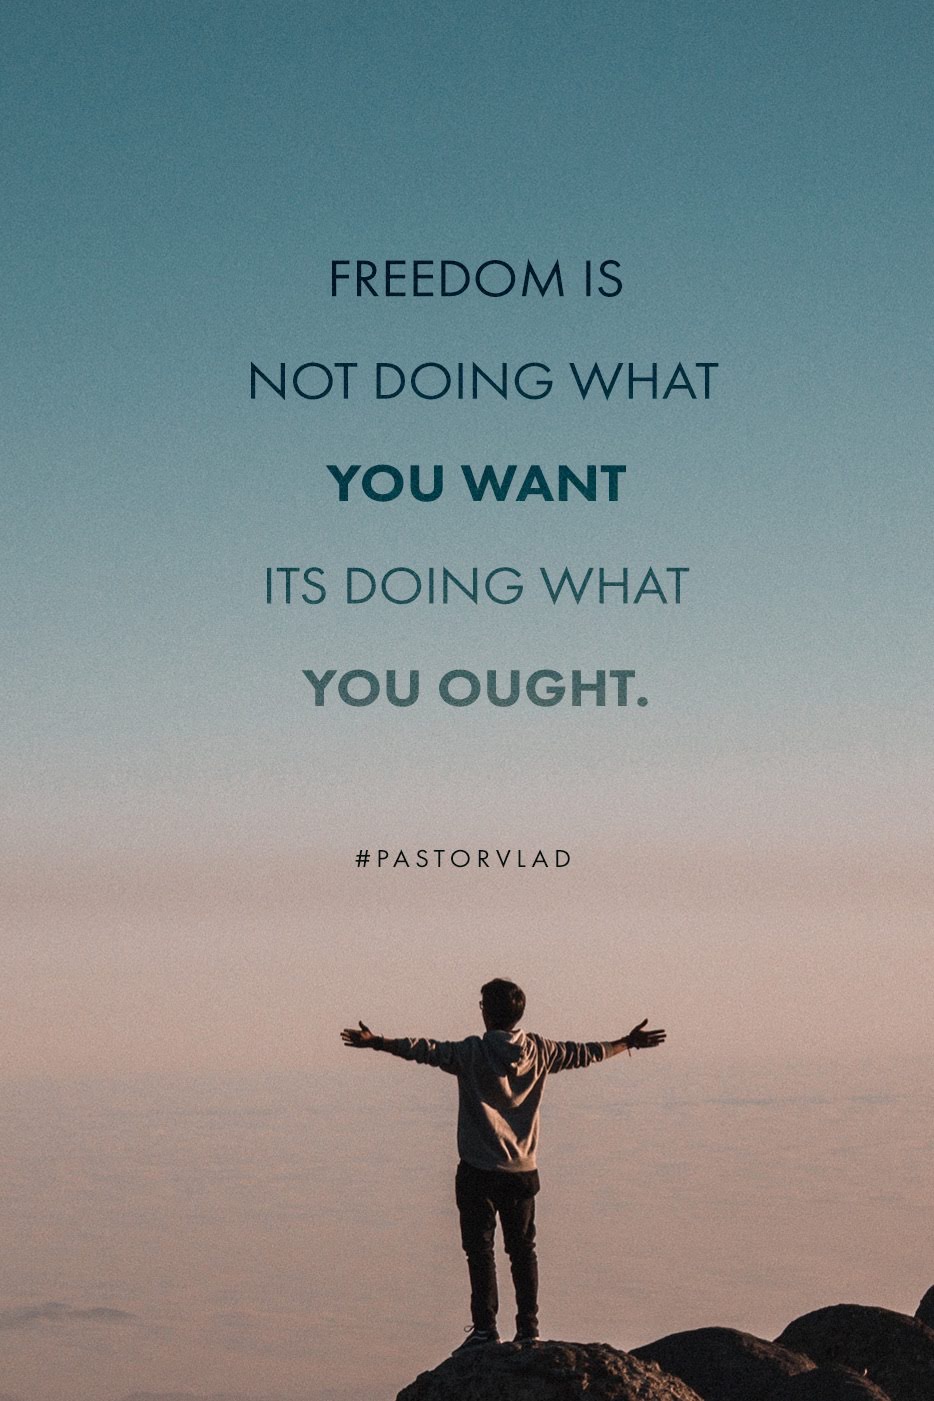 Shareable Quote for “Purpose of Freedom”